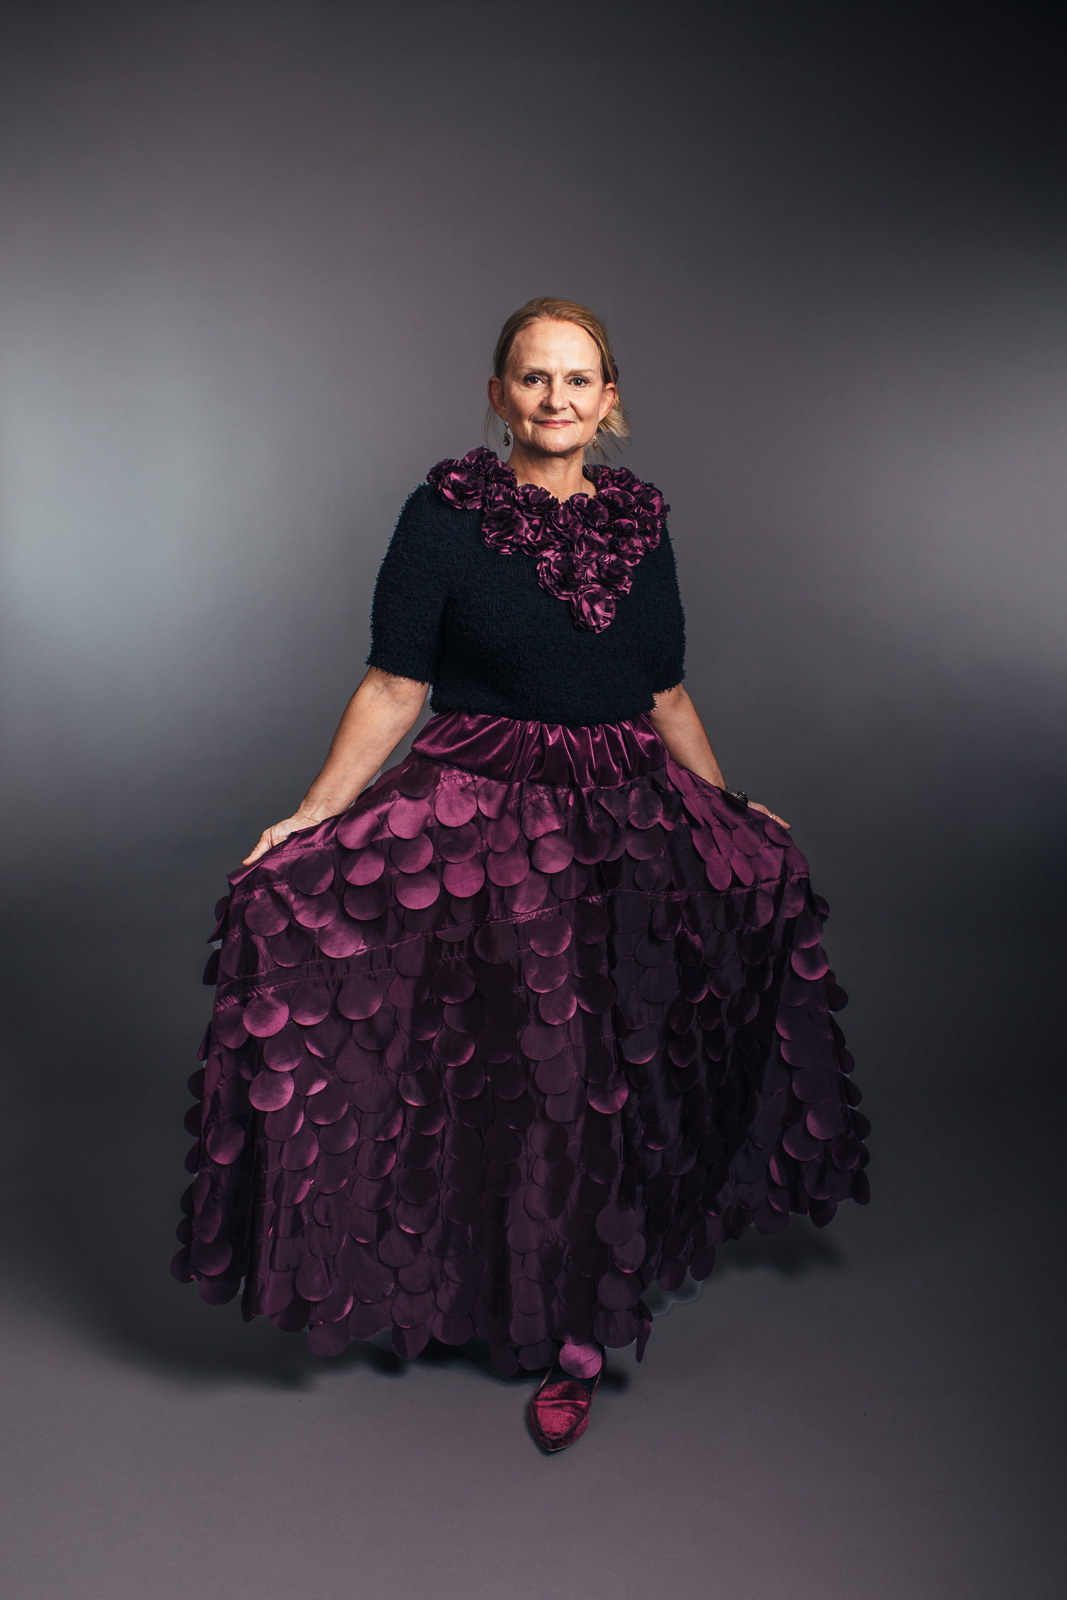 2023 Upcycled Fashion Show portrait by portrait artist, Kerry Struble, of Birch Blaze Studios located in Wakefield, NH. Gorgeous purple skirt with hundreds of handcut circles and matching handmade floral collar, all made from upcycled draderies!